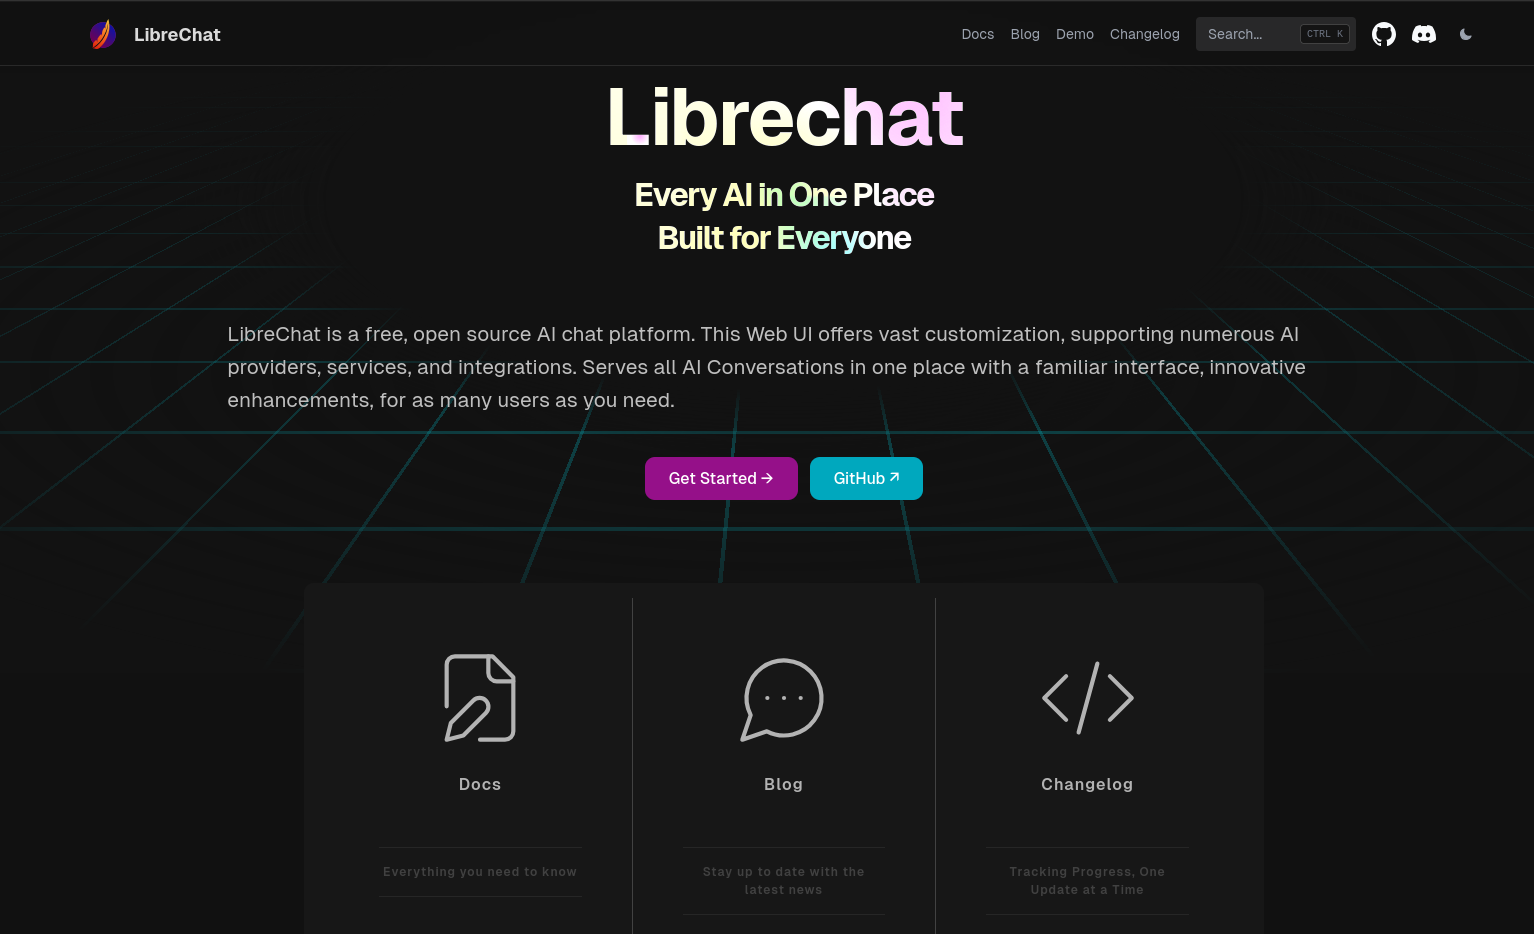 LibreChat: Keep Your AI Models in One Place